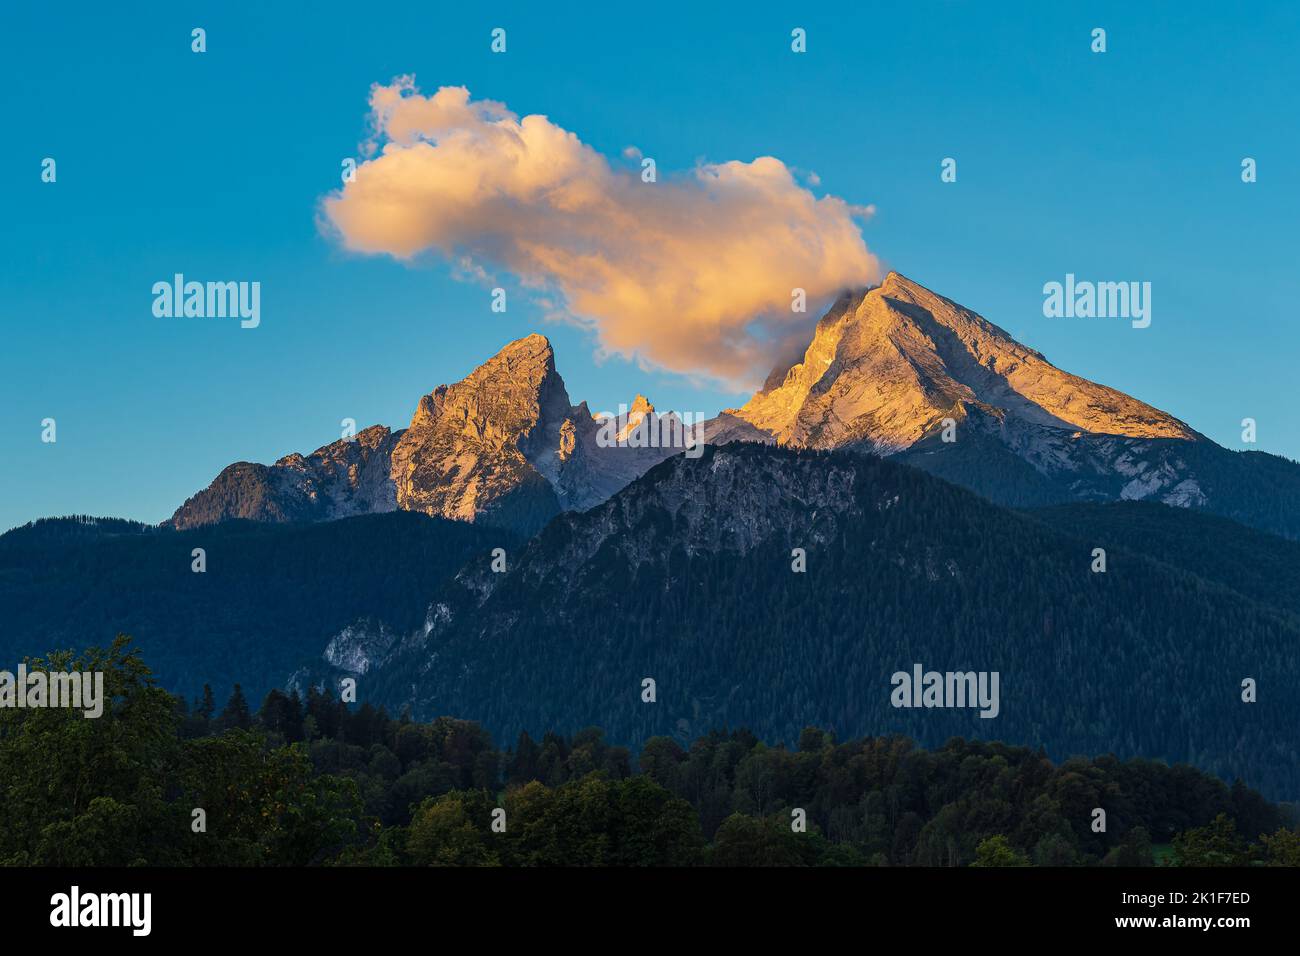 Landscape with the mountain Watzmann in the Berchtesgaden Alps, Germany. Stock Photo